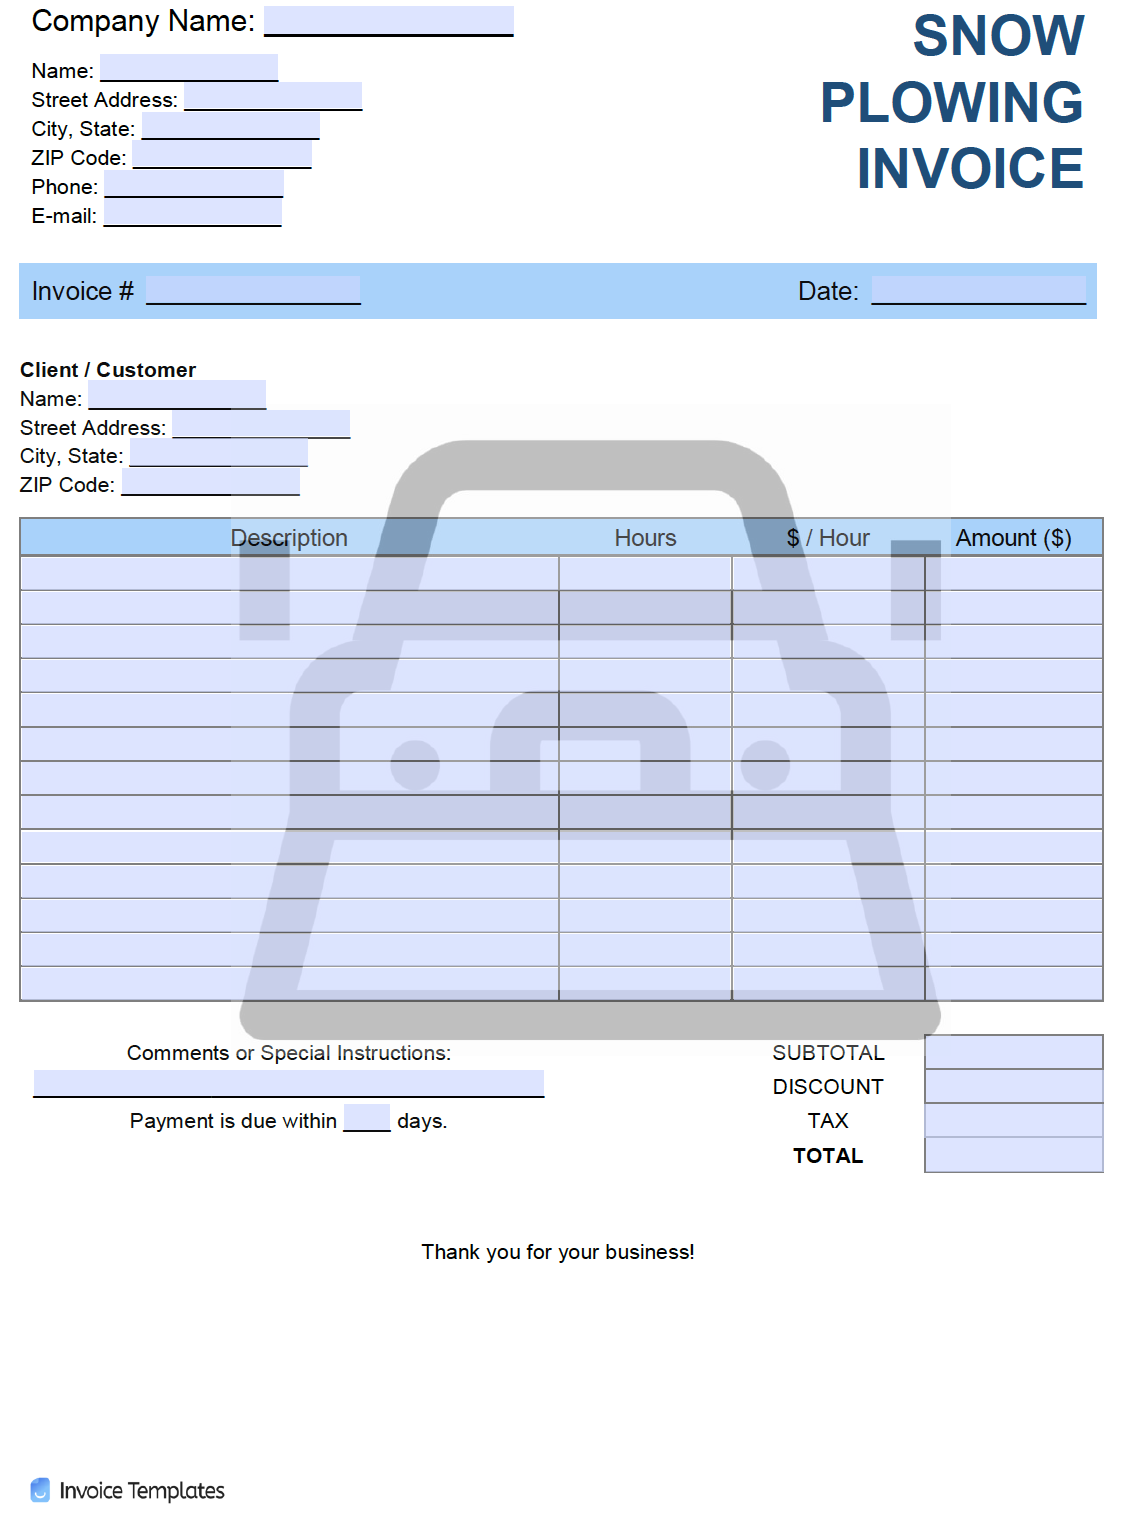 Free Snow Plowing Invoice Template Printable Templates